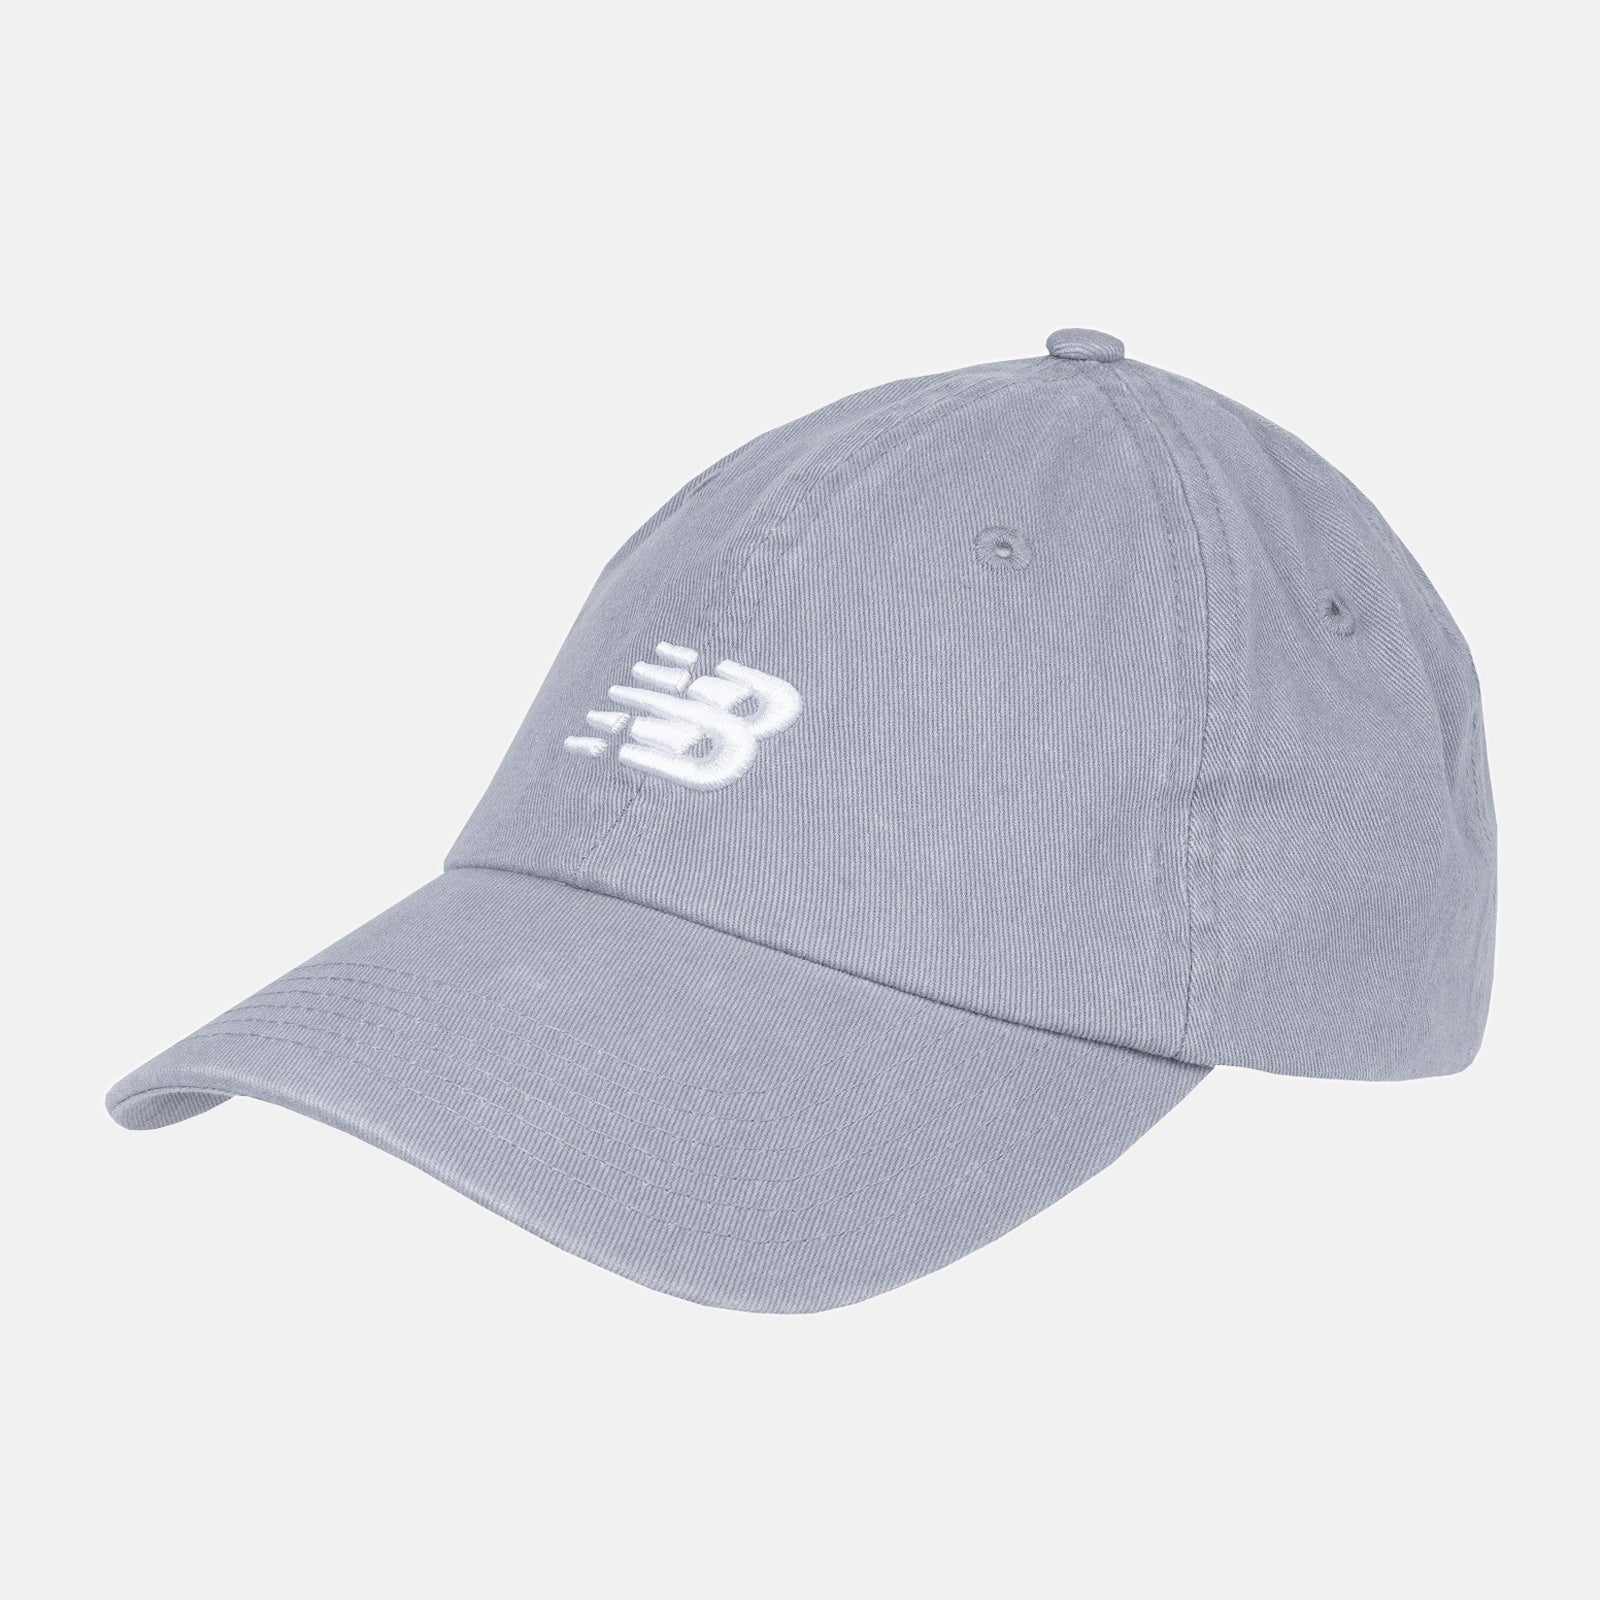 NEW BALANCE 6-Panel Curved Brim NB Classic Hat in Steel LAH91014 O/S STEEL FROM EIGHTYWINGOLD - OFFICIAL BRAND PARTNER